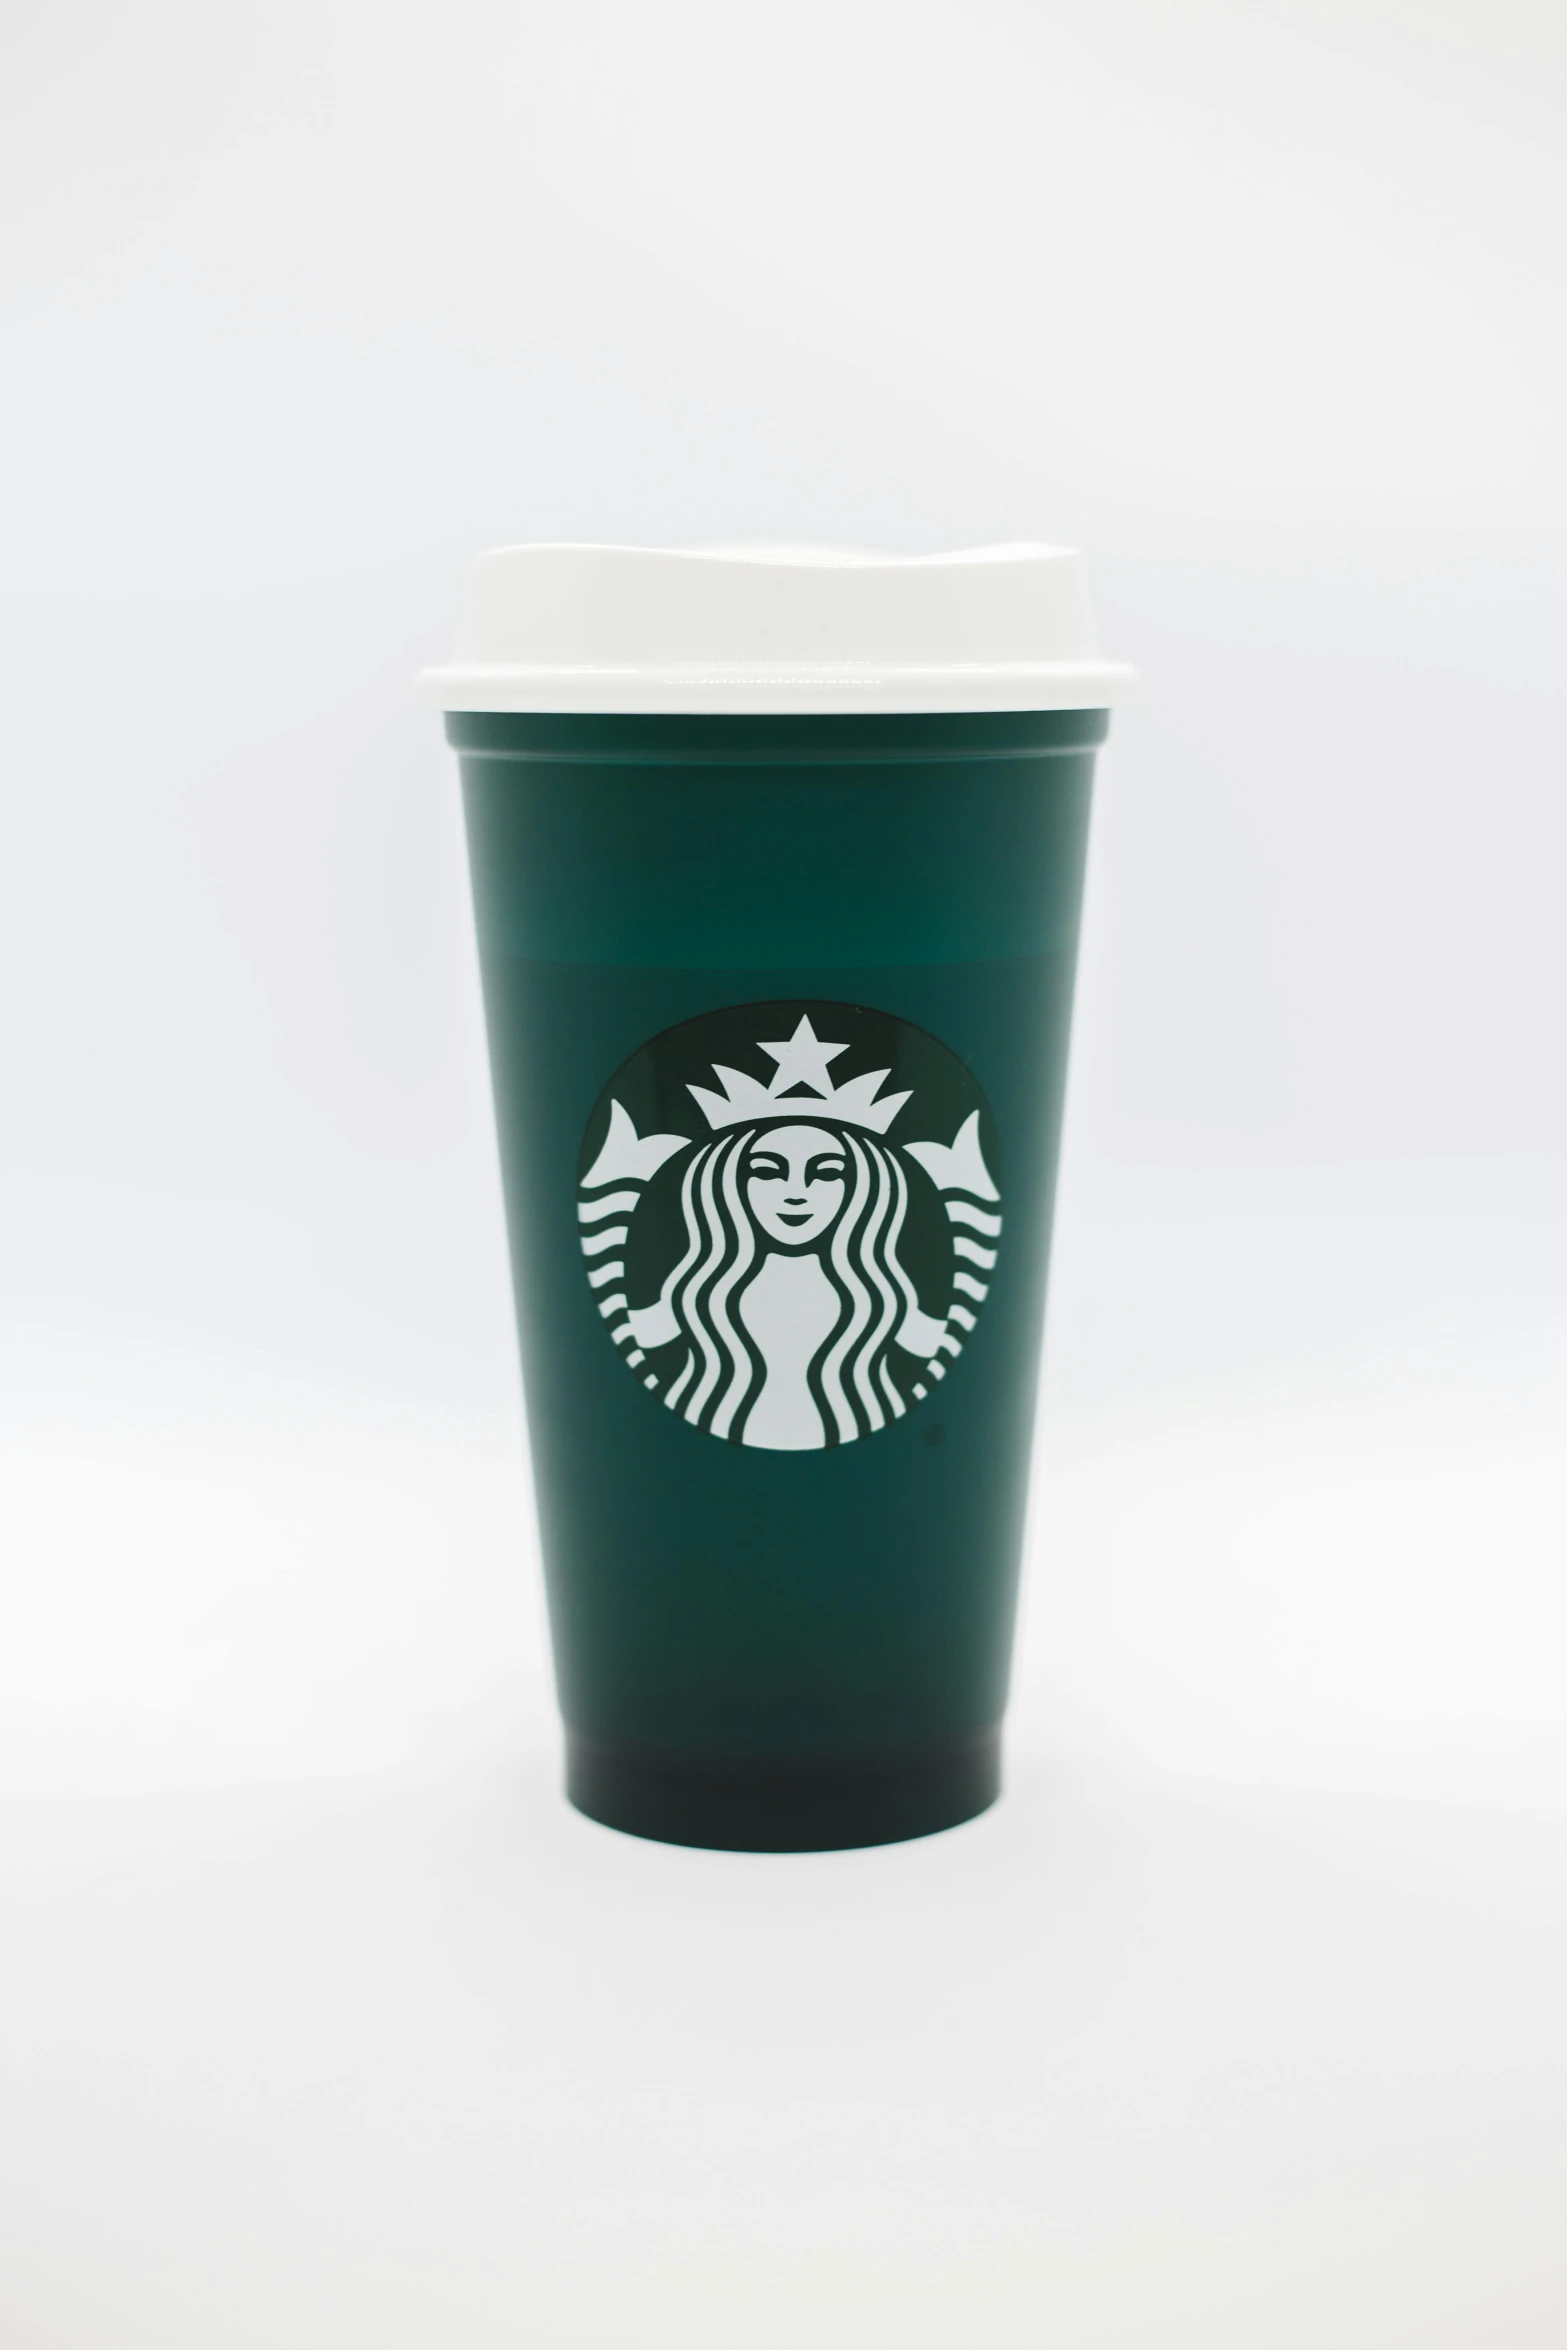 a starbucks cup on a white background, reddit, dark emerald mist colors, made out of plastic, full face view, spray